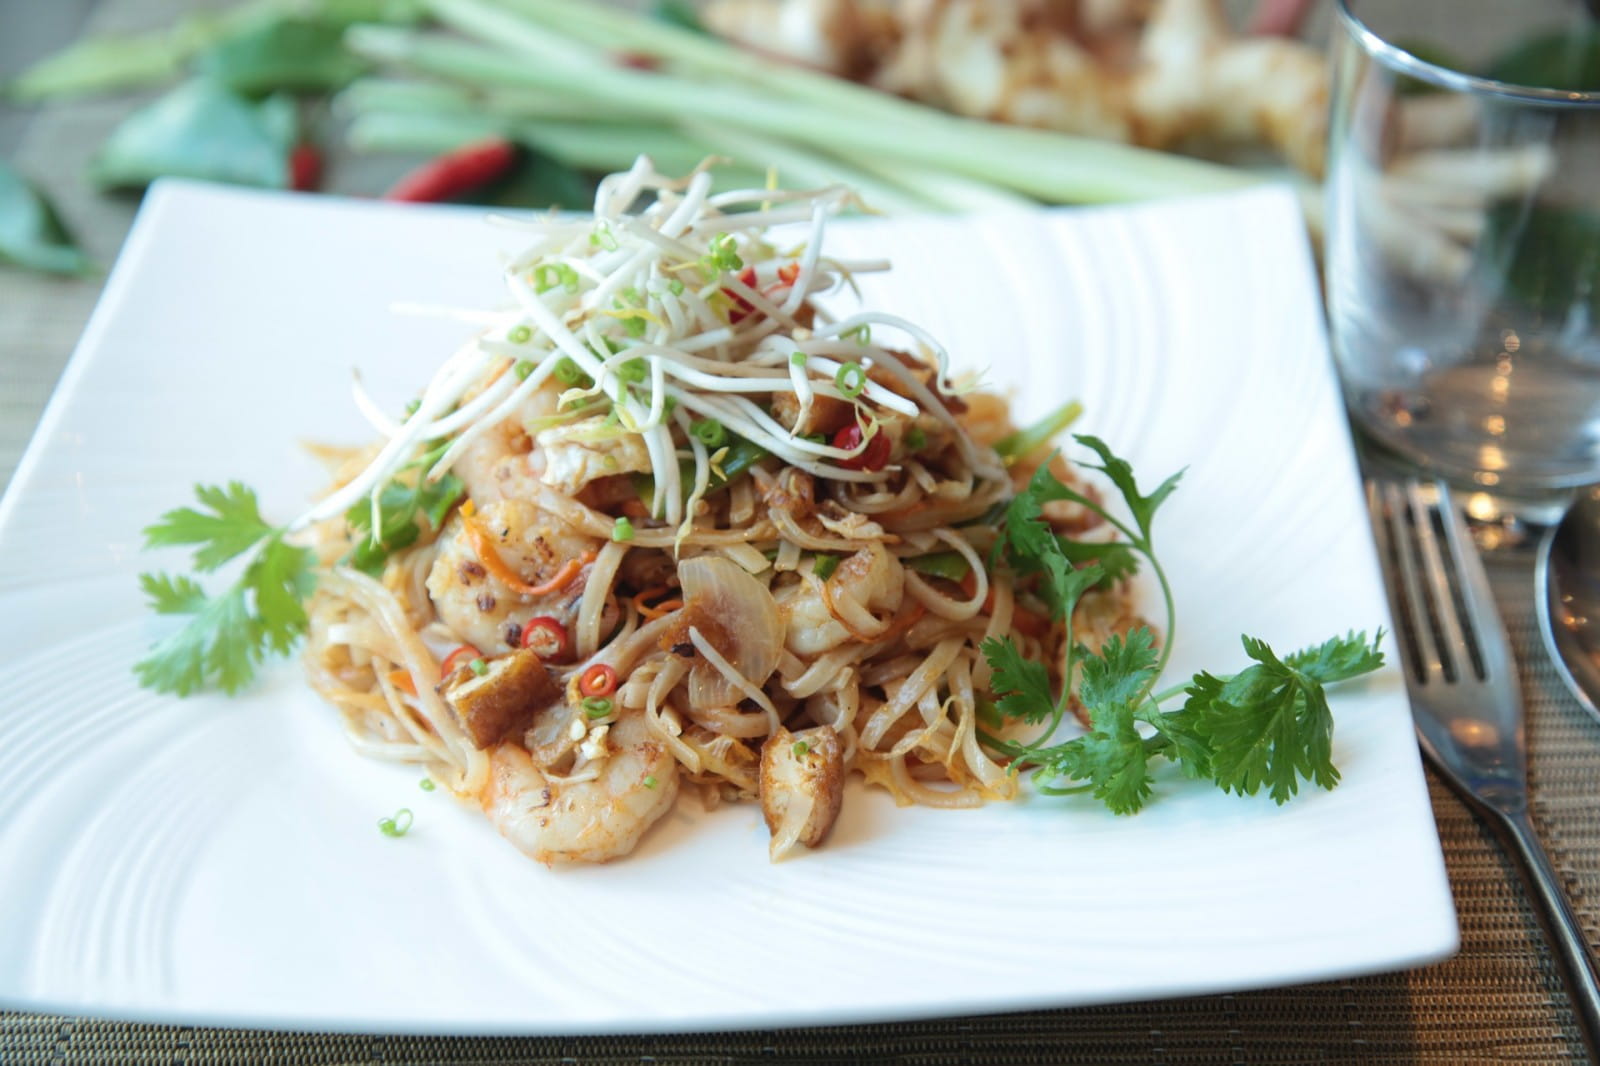 What wine would you drink with Pad Thai?